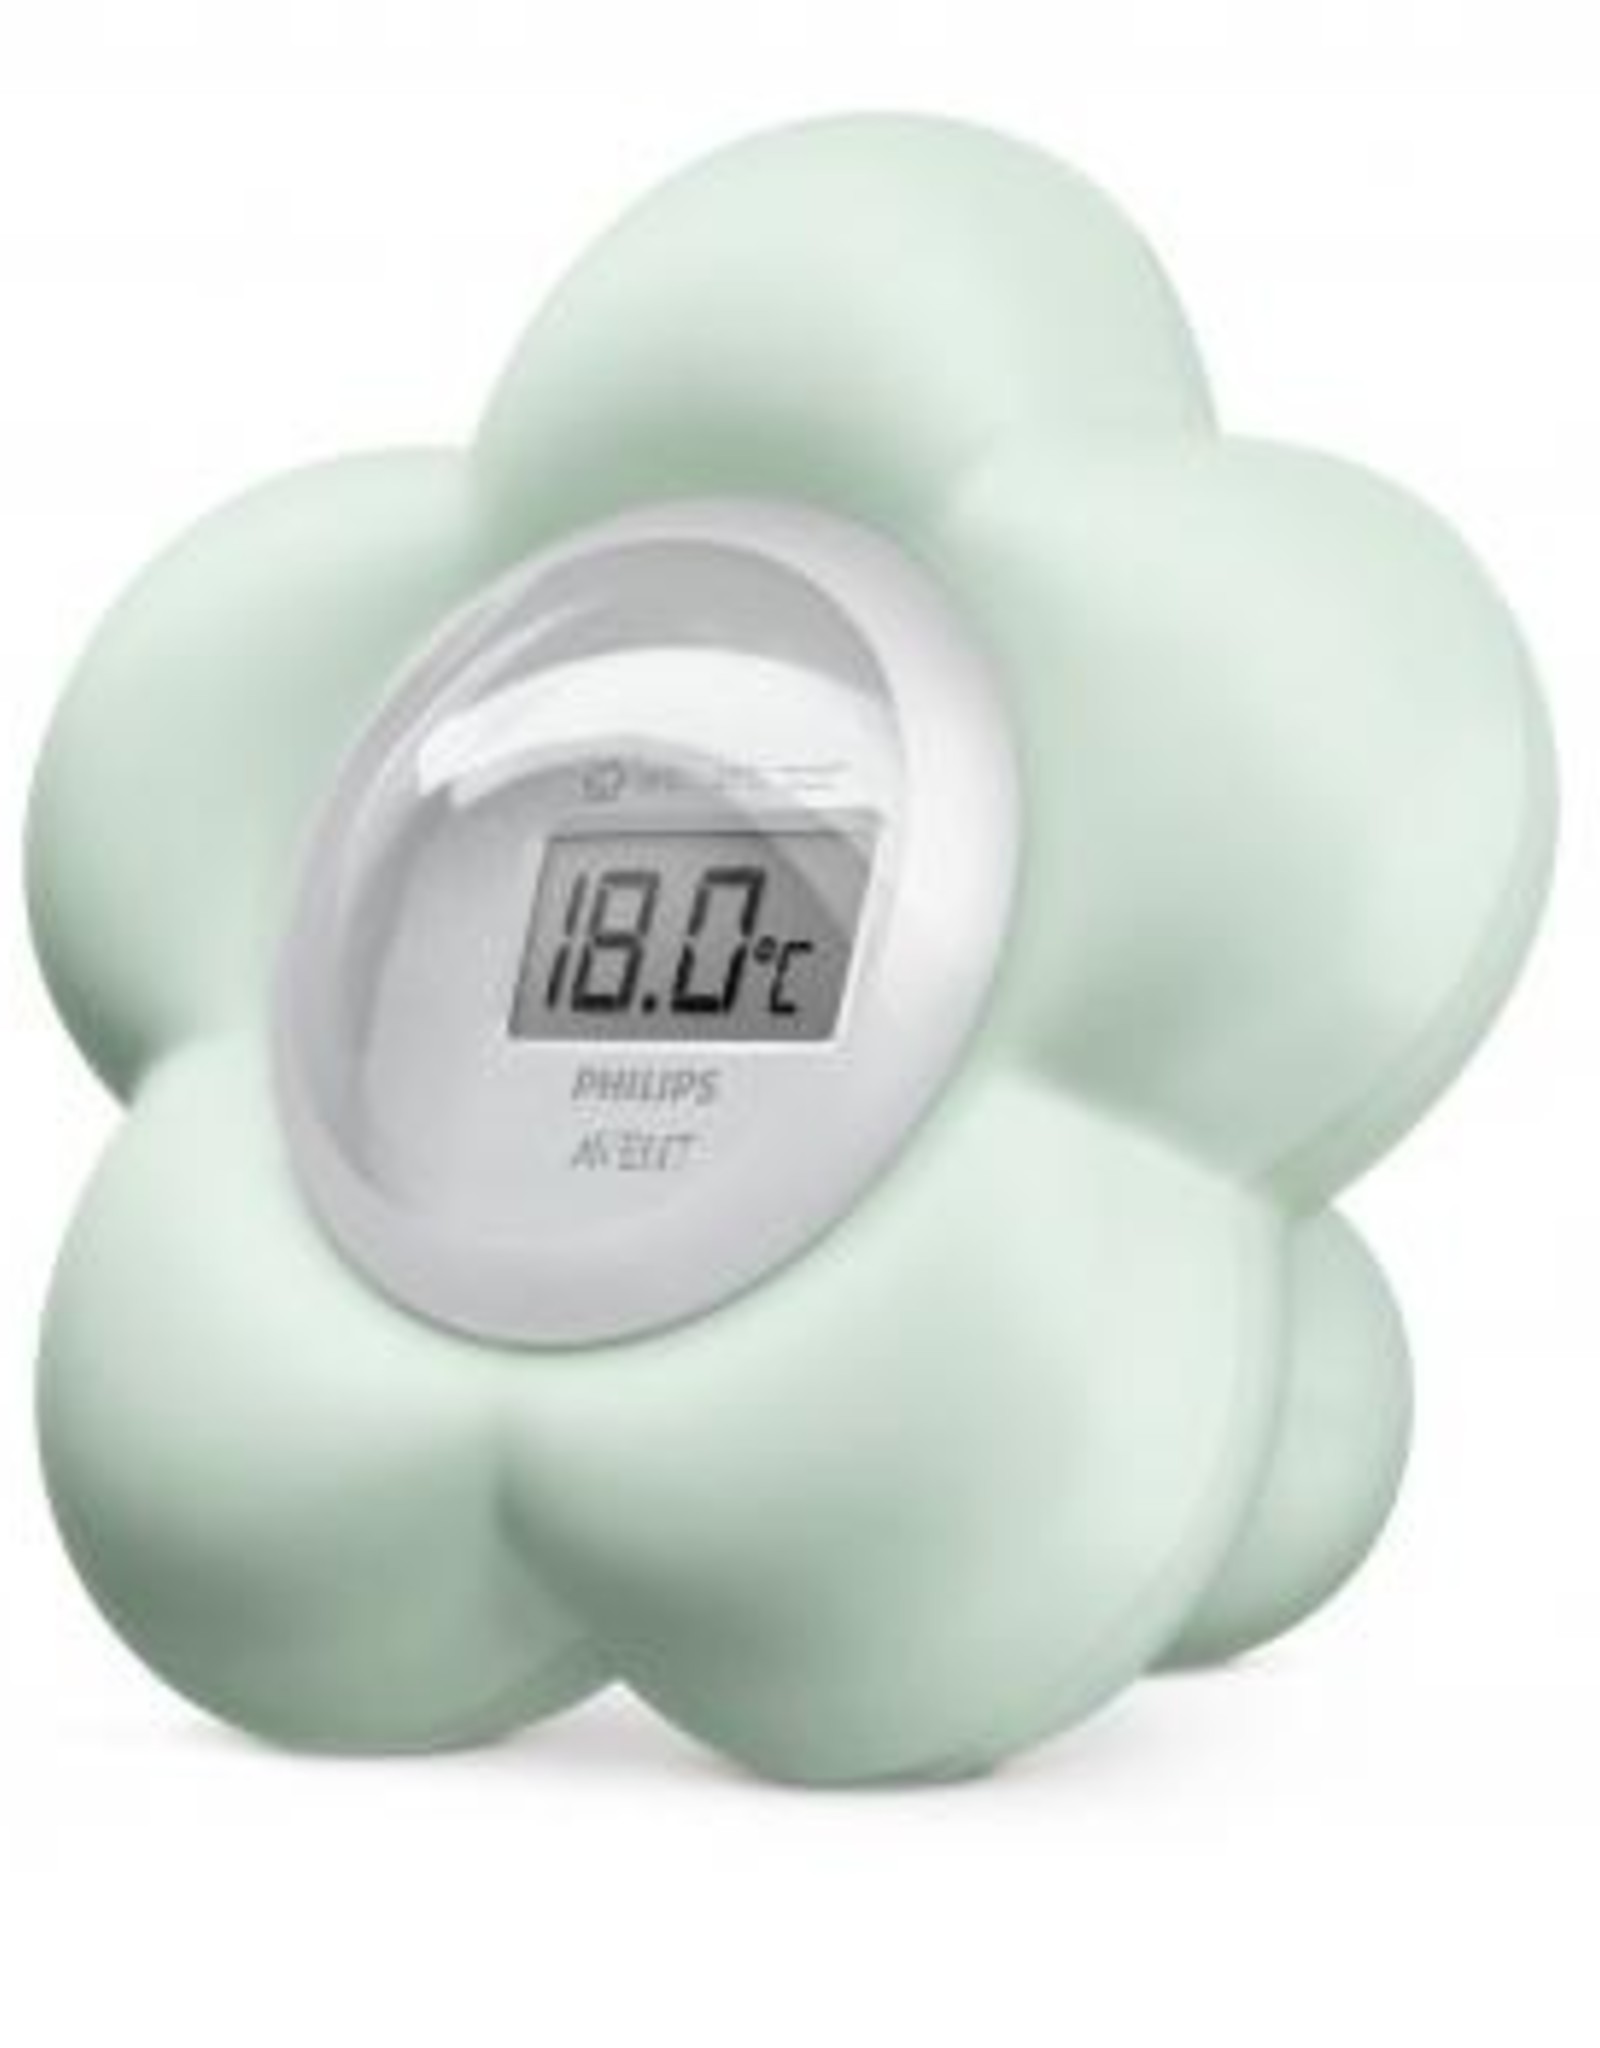 Avent Digital thermometer